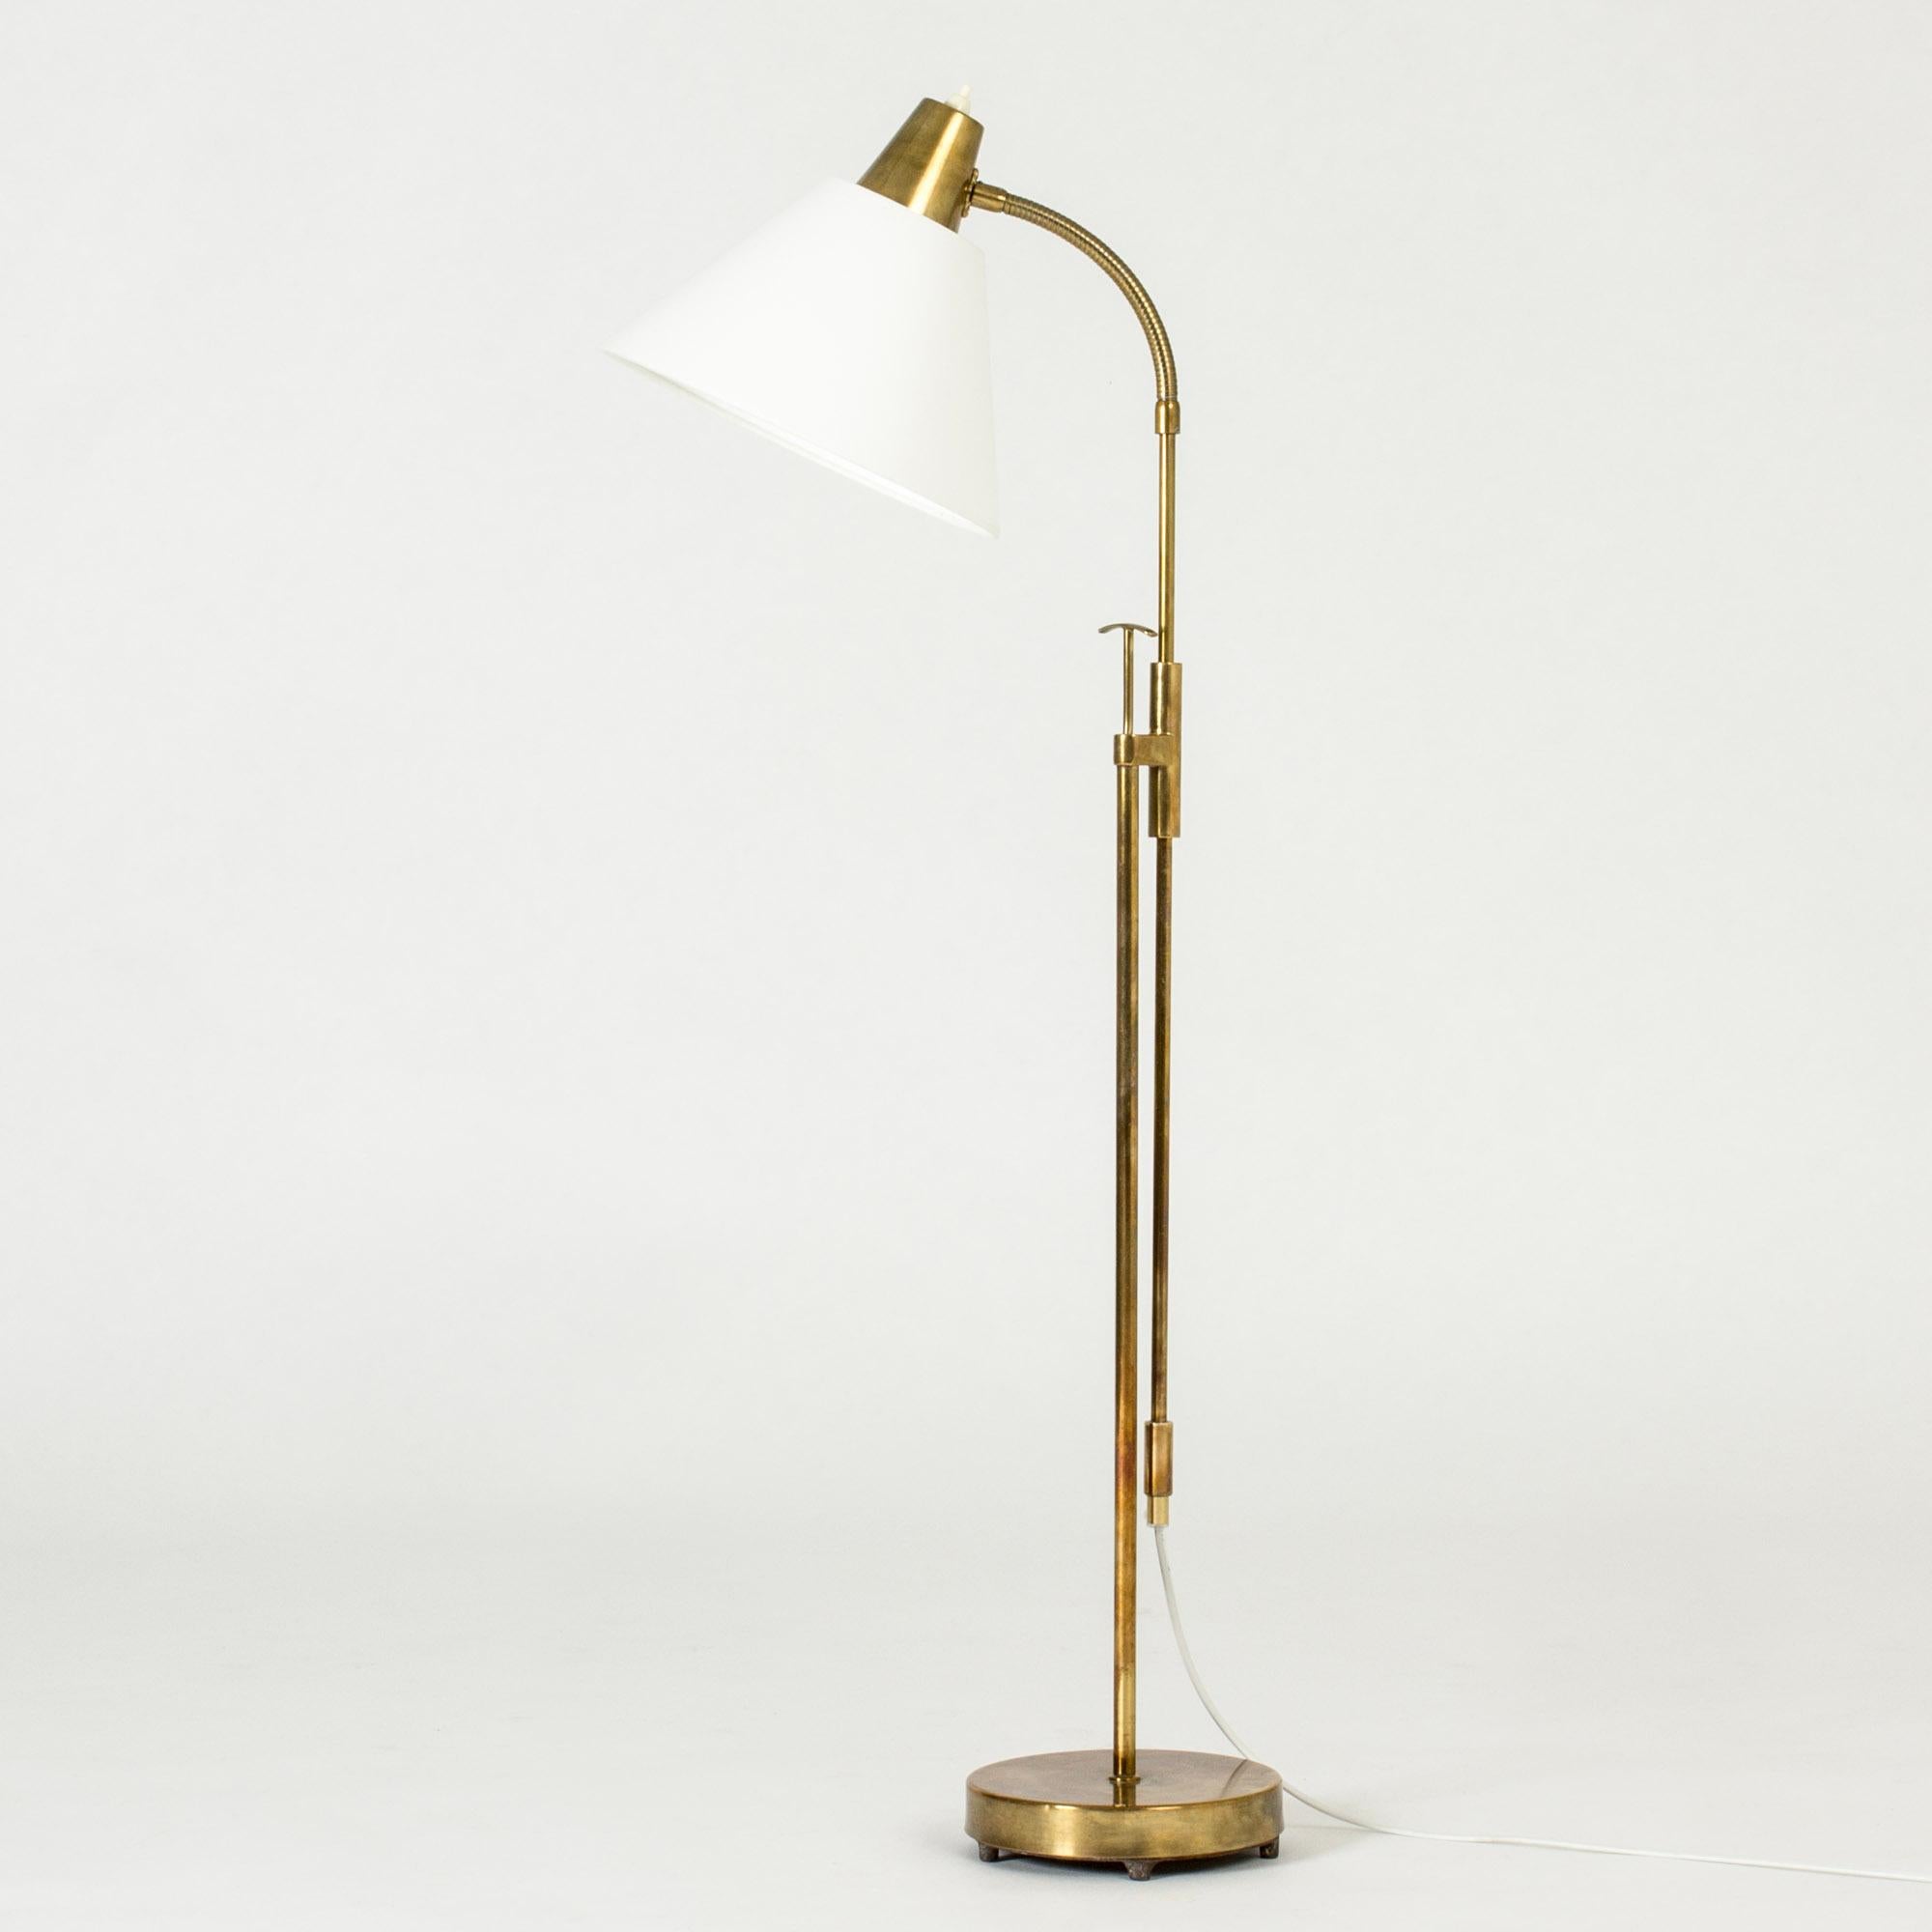 Brass floor lamp from Falkenbergs Belysning, with adjustable height and flexible neck. Elegant brass “T” detail, that allows you to lift and move the lamp with two fingers.

Height 95-136 cm.